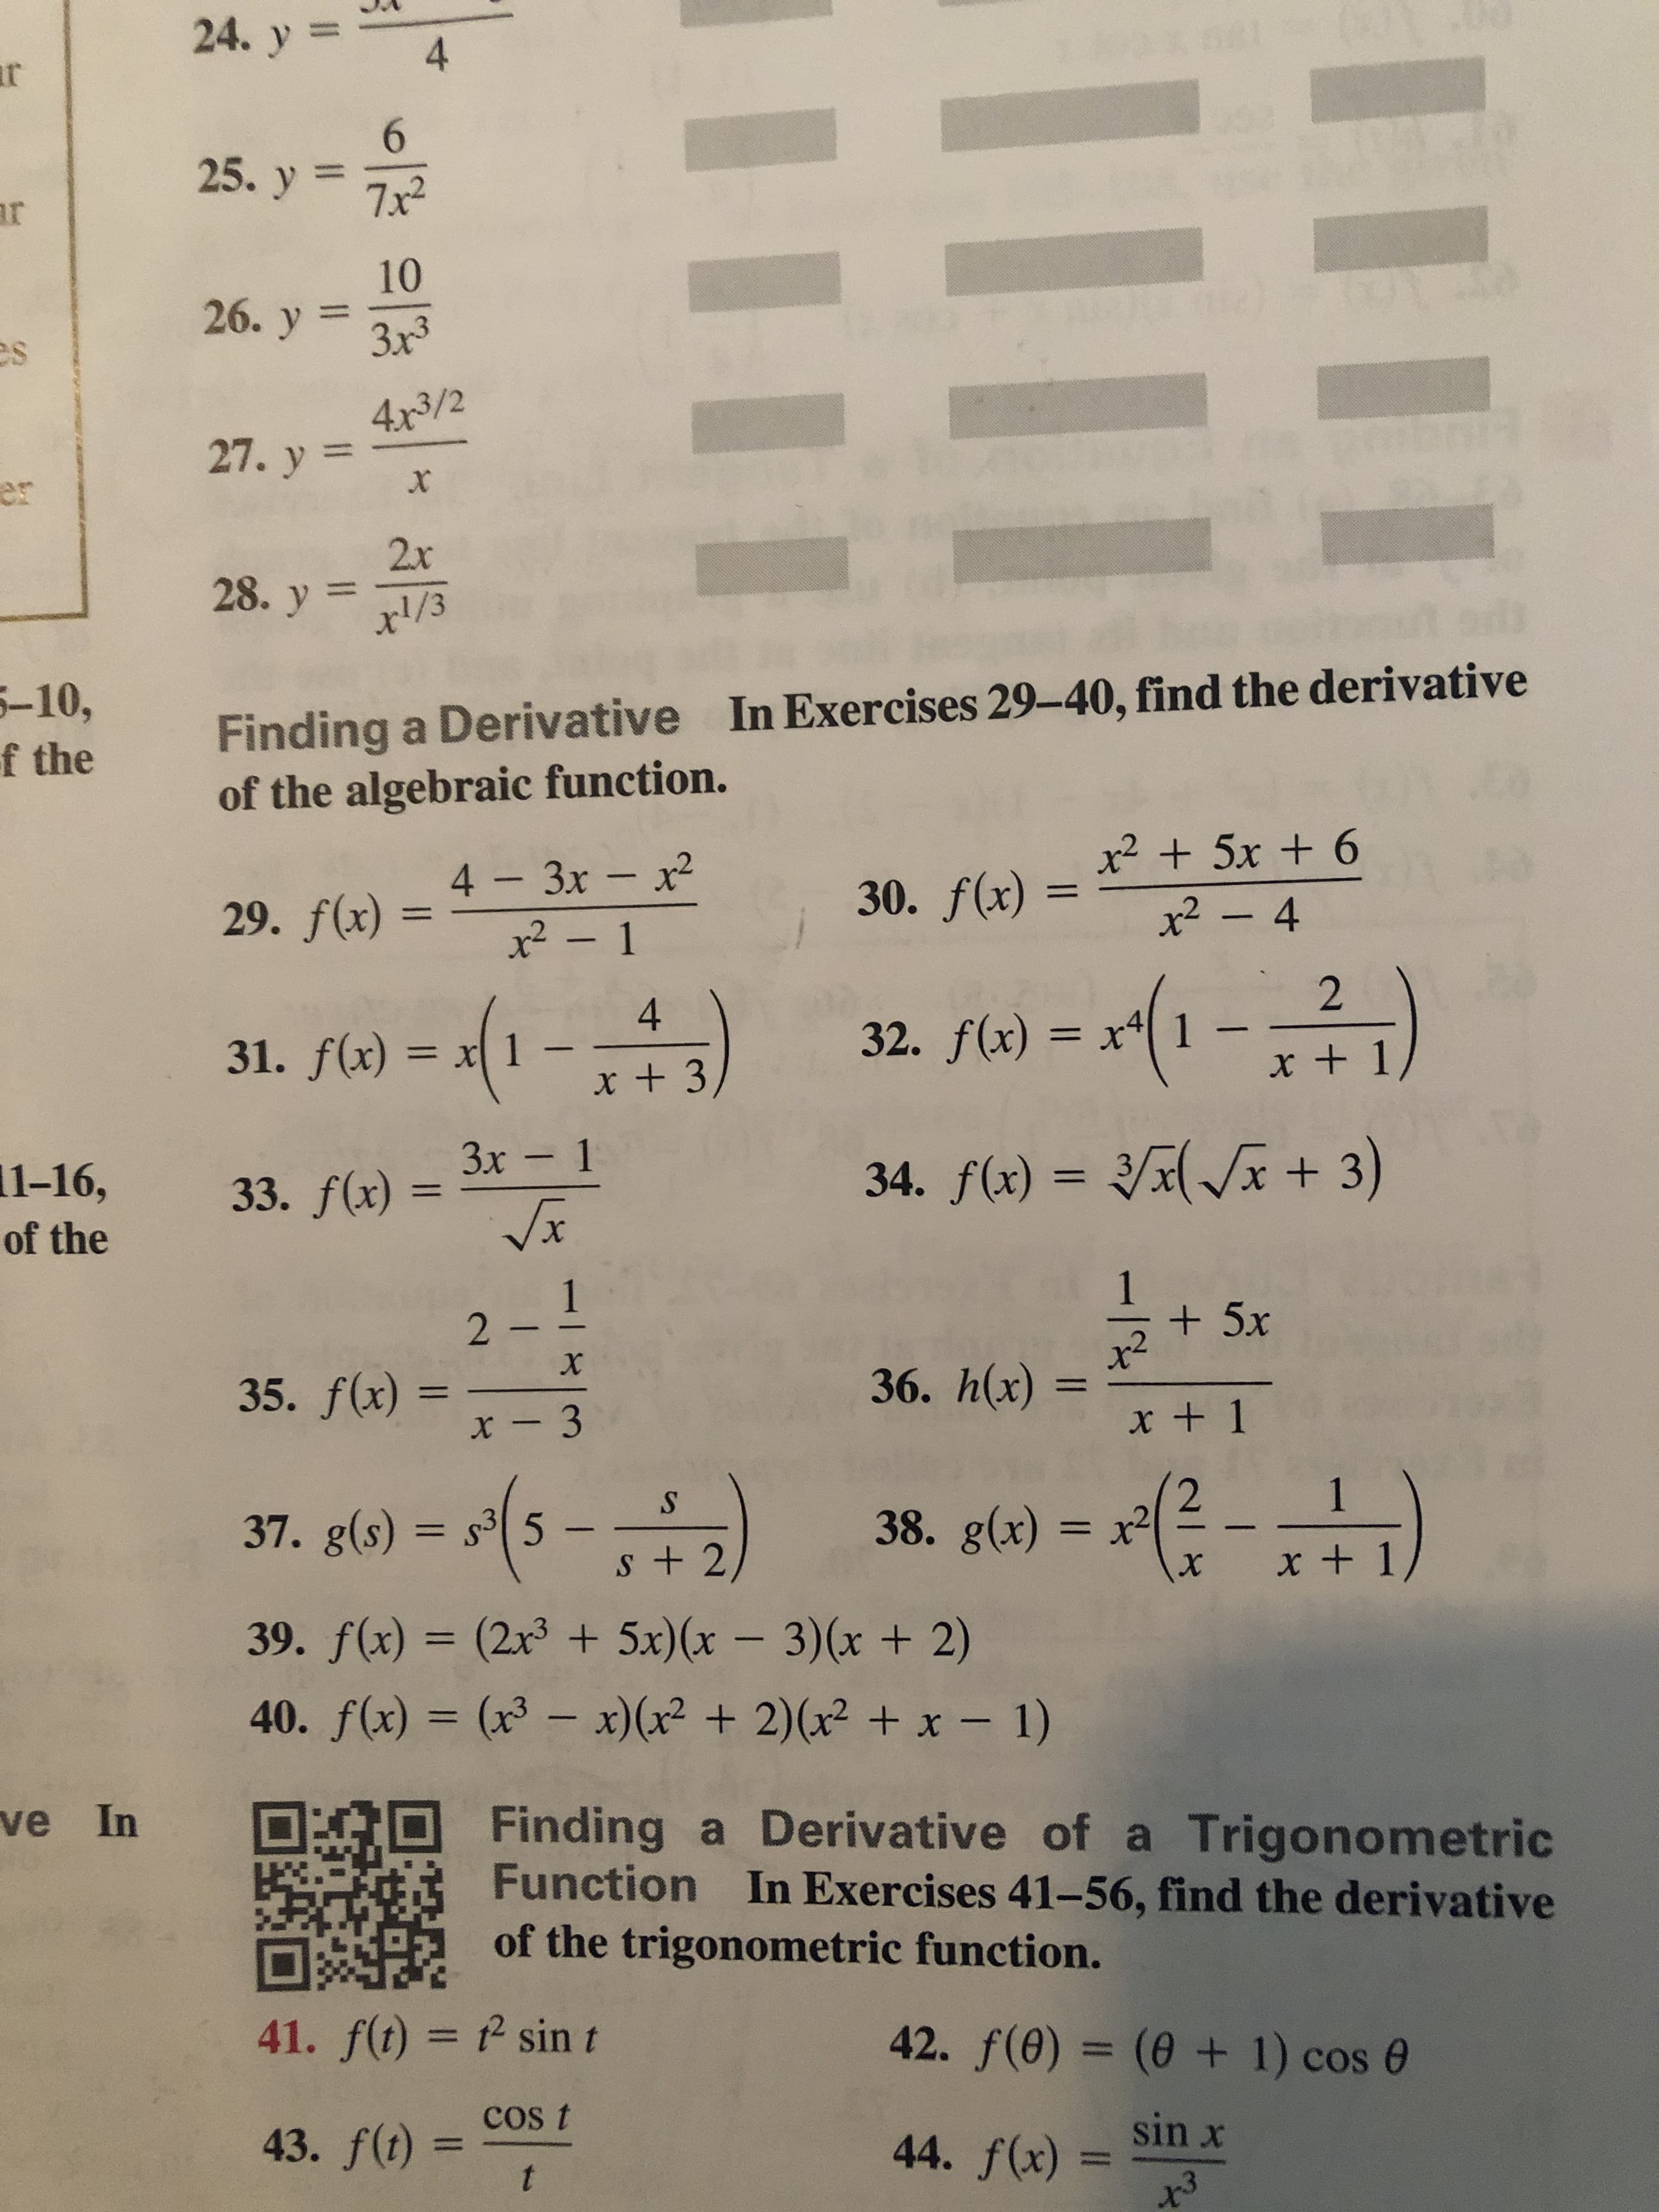 Ud
24. y
l
4
ar
6
25. y 7x2
ar
10
26. y 3x3
es
4x3/2
27. y
X
er
2x
28. y1/3
Finding a Derivative In Exercises 29-40, find the derivative
of the algebraic function.
-10,
f the
30. f(x) +5x + 6
x2-4
4 3x - x2
x2- 1
11
29. f(x)
2
4
32. f(x) x4
1
31. f(x)
x + 1
X
x +3
33. f(x) 3x- 1
Vx
Зх —
+3)
34. f(x)
1-16,
11
of the
1
+5x
1
2 -
х
36. h(x)
35. f(x) =
x +1
x - 3
- -)
1
S
38. g(x) = x
37. g(s) s3
+2
x + 1
X
39. f(x) (2x3 +5x)(x - 3)(x + 2)
40. f(x) (x3 - x)(x2 +2)(x2 + x - 1)
ve In
Finding a Derivative of a Trigonometric
Function In Exercises 41-56, find the derivative
of the trigonometric function.
42. f(0) (0 1) cos e
41. f(t) 2 sin t
sin x
44. f(x)
43. f(t) COS t
t
-12
